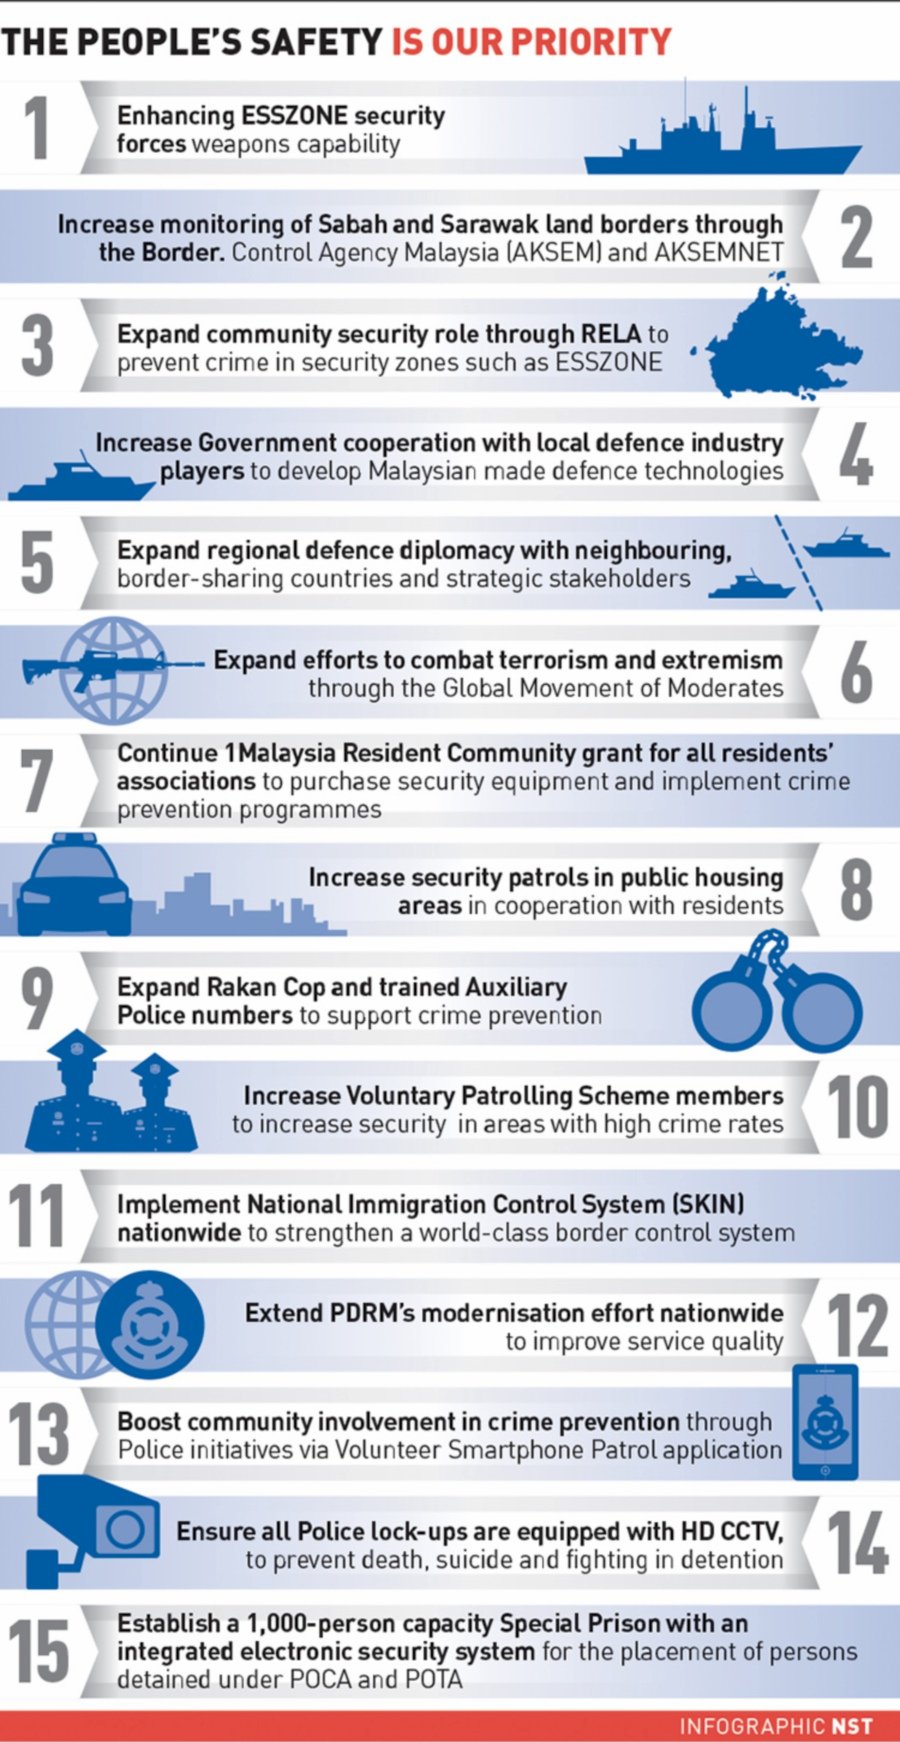 Bn Manifesto Aims To Guard Malaysia S Borders Both Physical And In Cyberspace